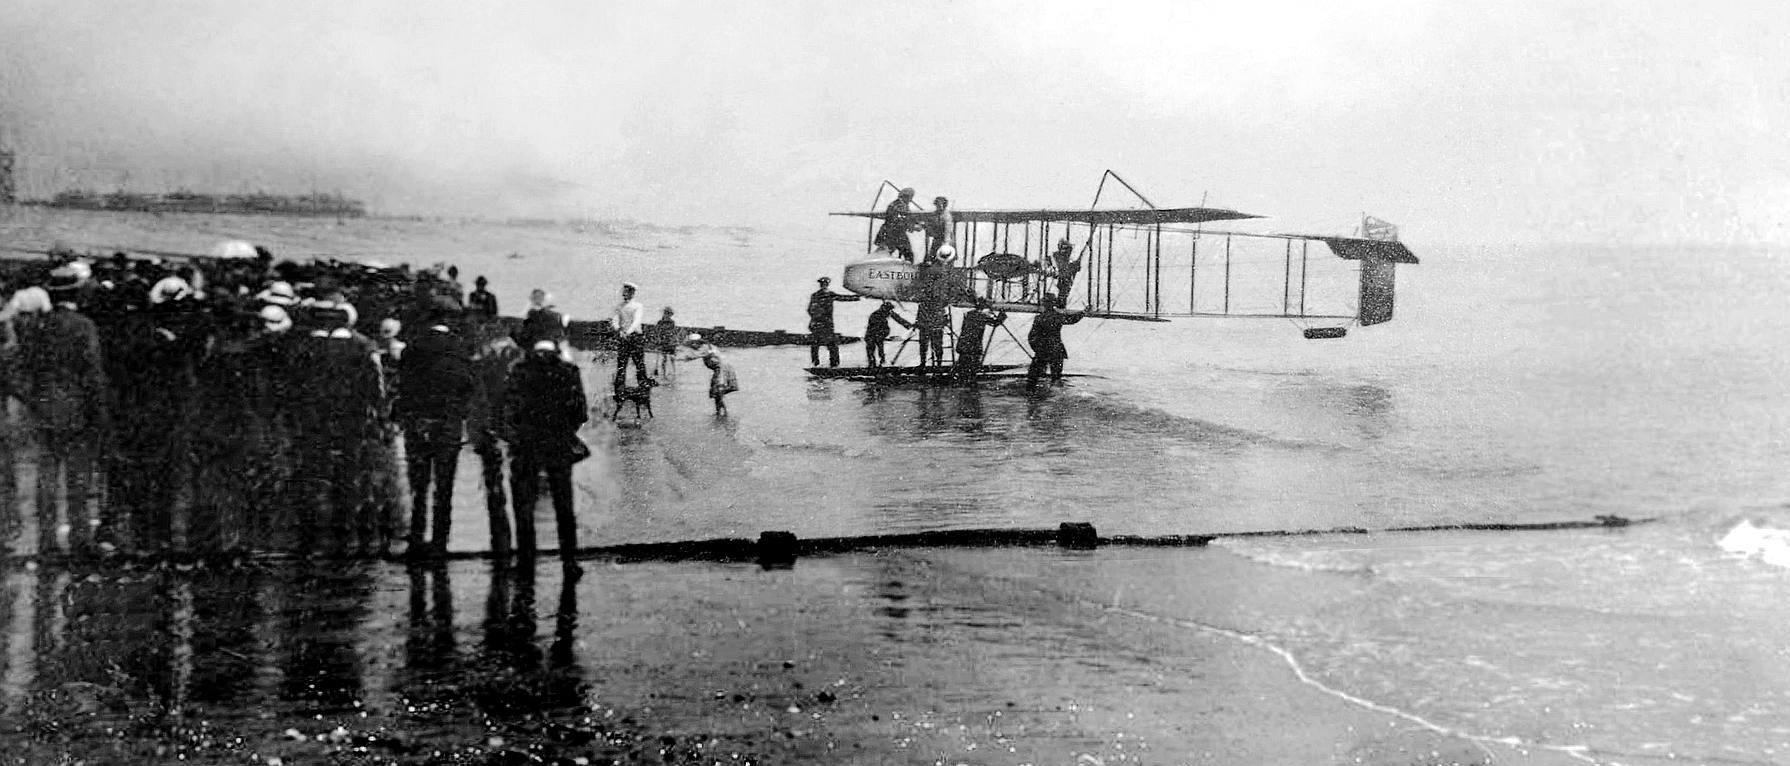 The Eastbourne Aviation Company launch a seaplane on the beach